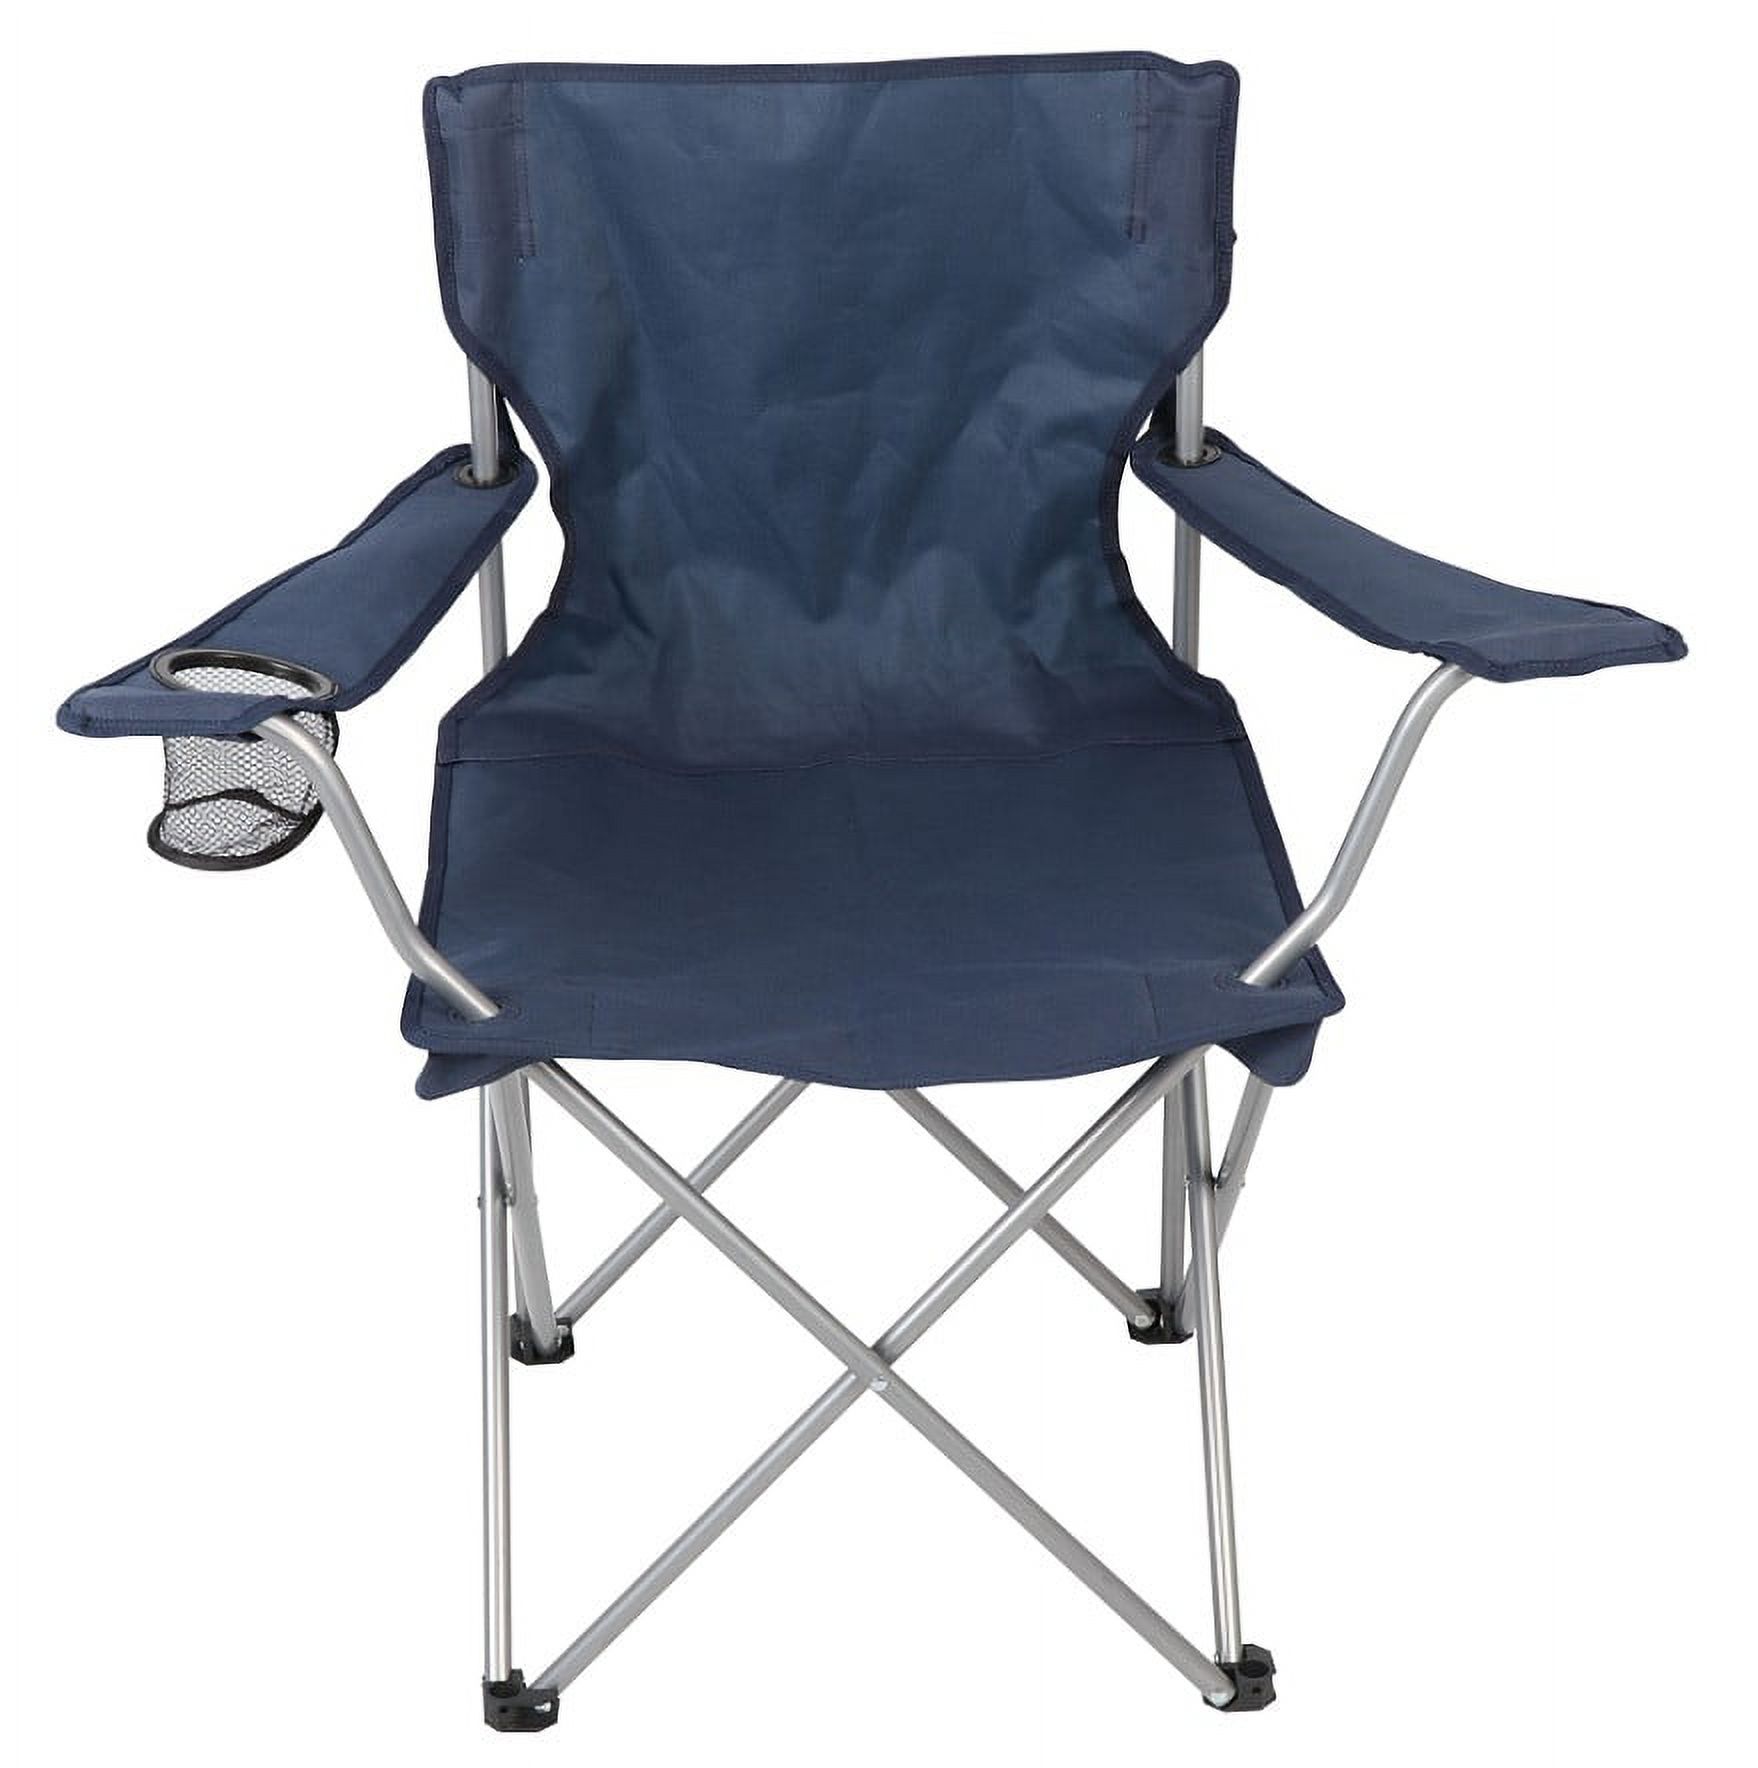 Ozark Trail Basic Quad Folding Camp Chair With Cup Holder, Blue, Adult - image 1 of 14